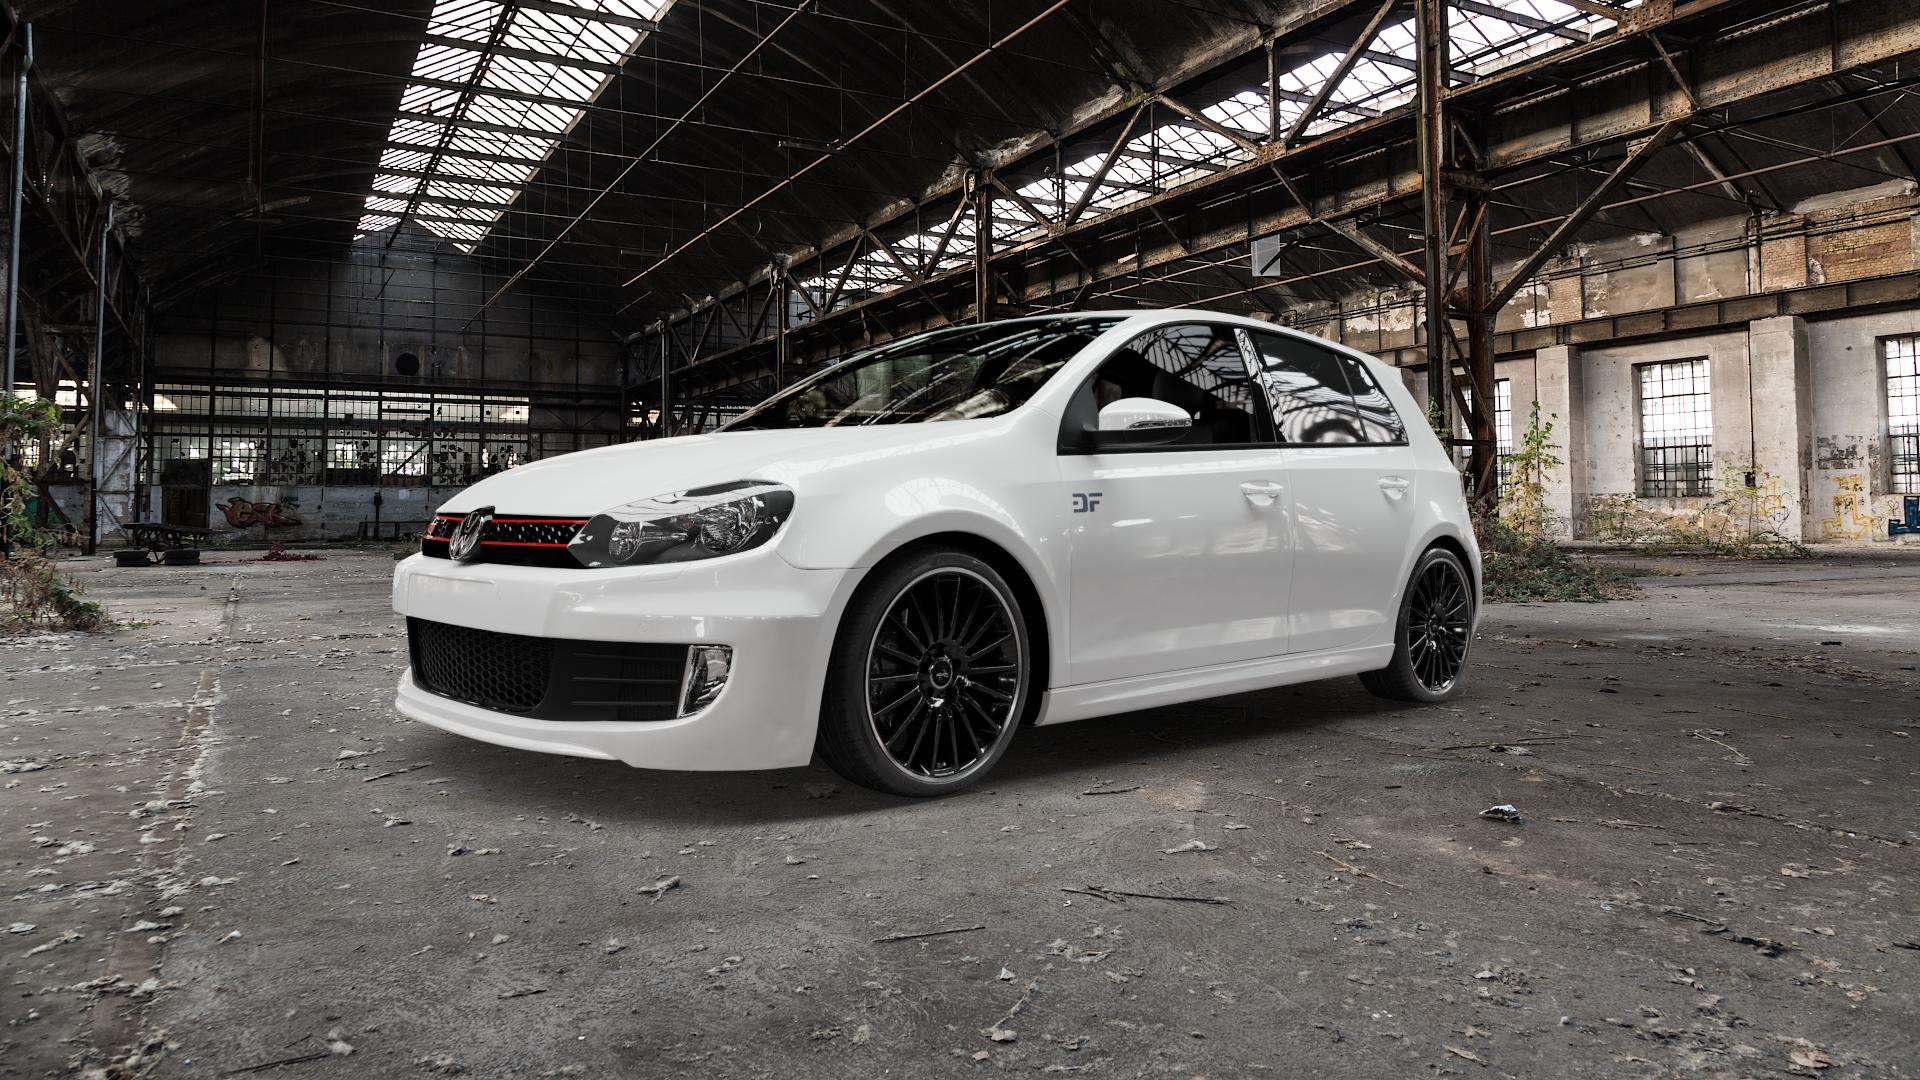 Volkswagen (VW) Golf 6 2,0l Turbo GTI Edition 35 173kW (235 hp) Wheels and  Tyre Packages